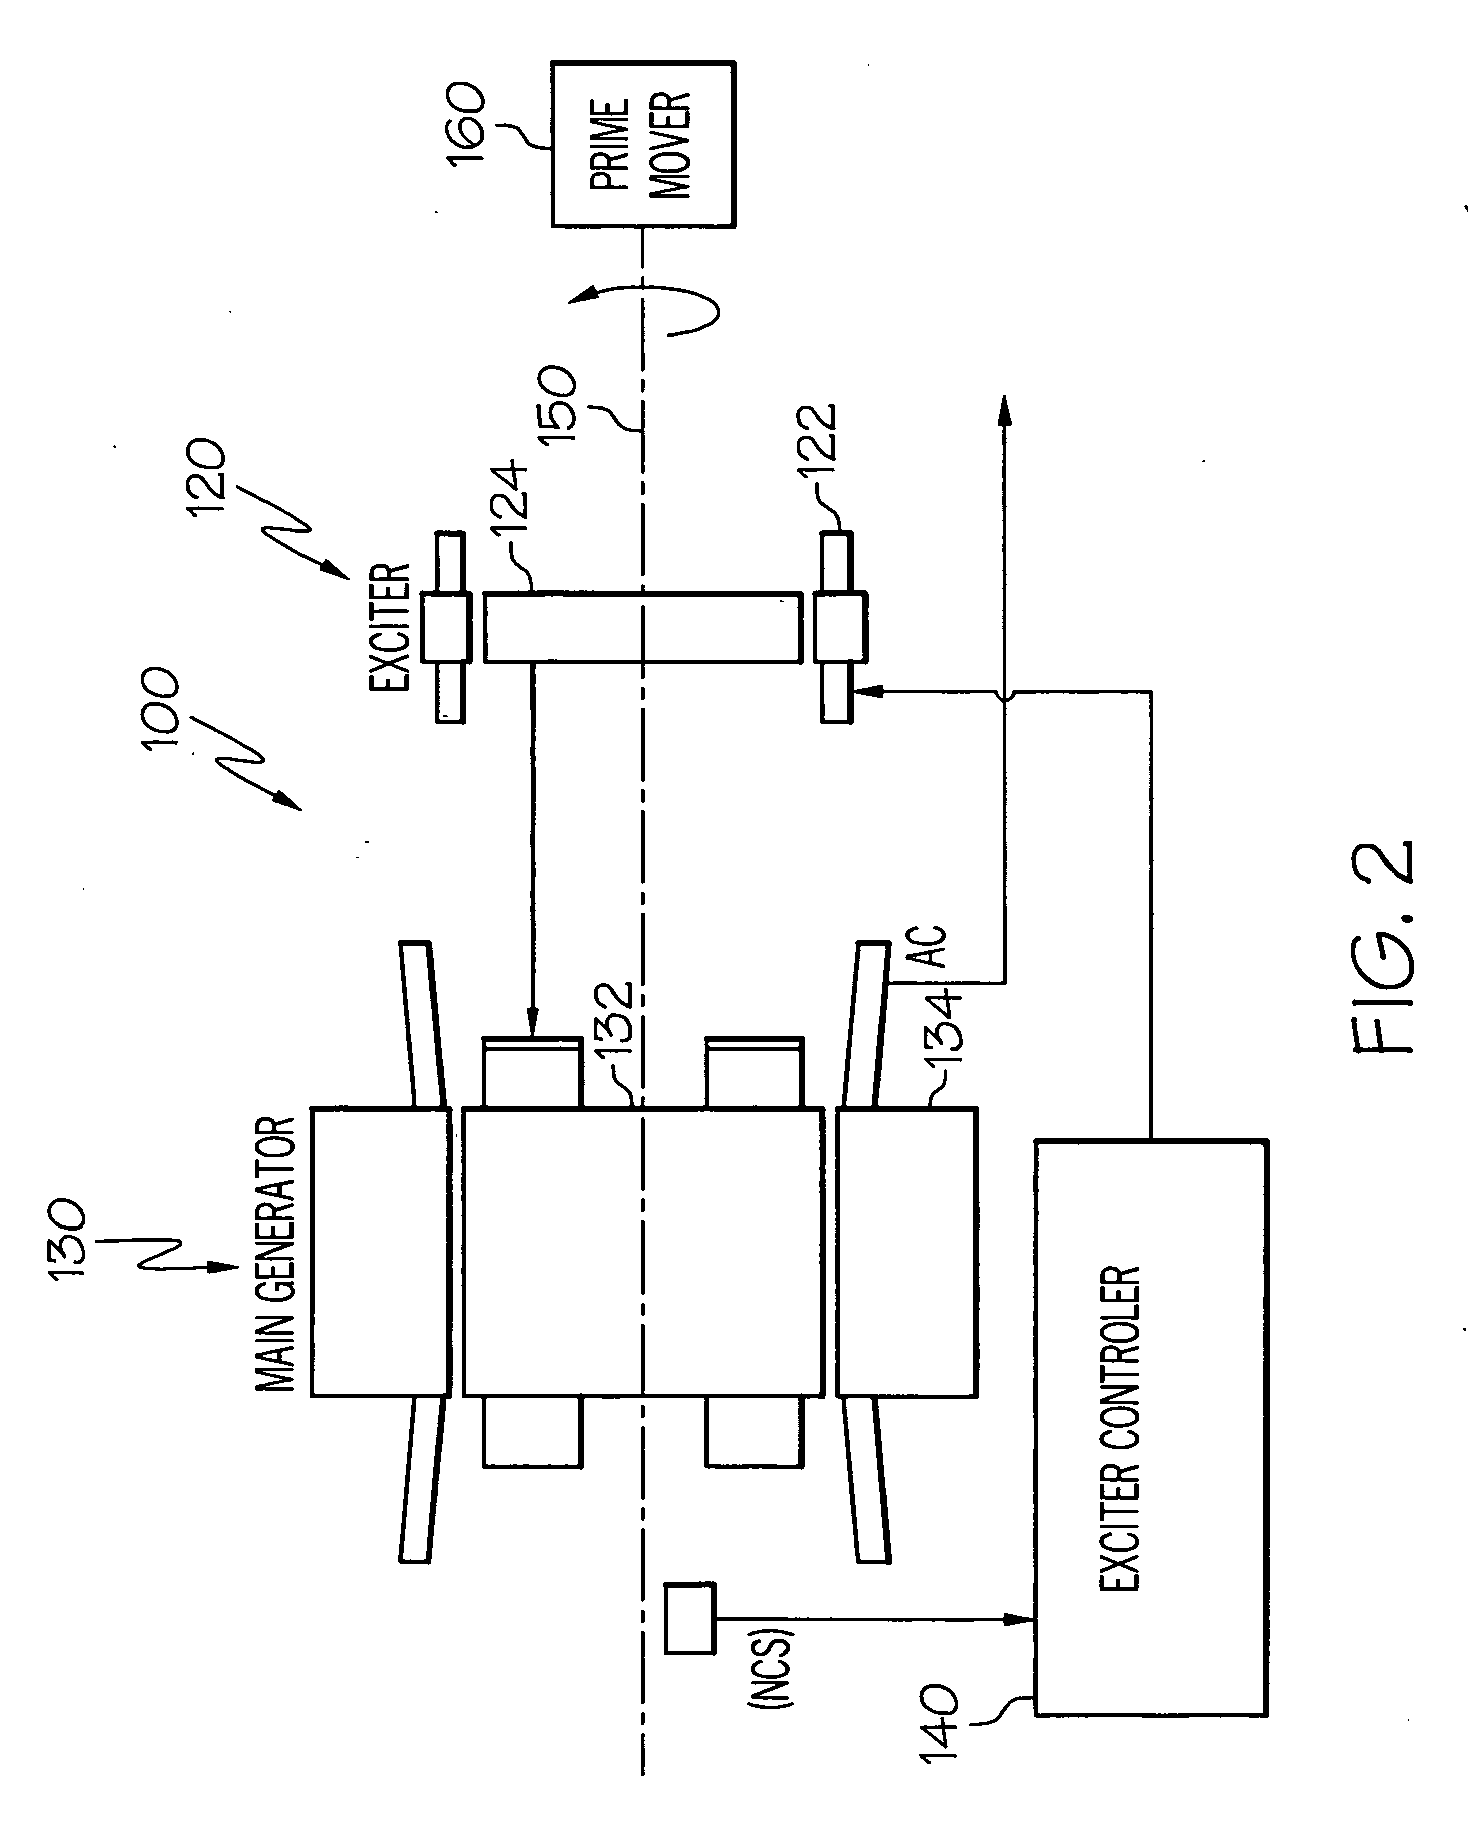 AC generator with independently controlled field rotational speed